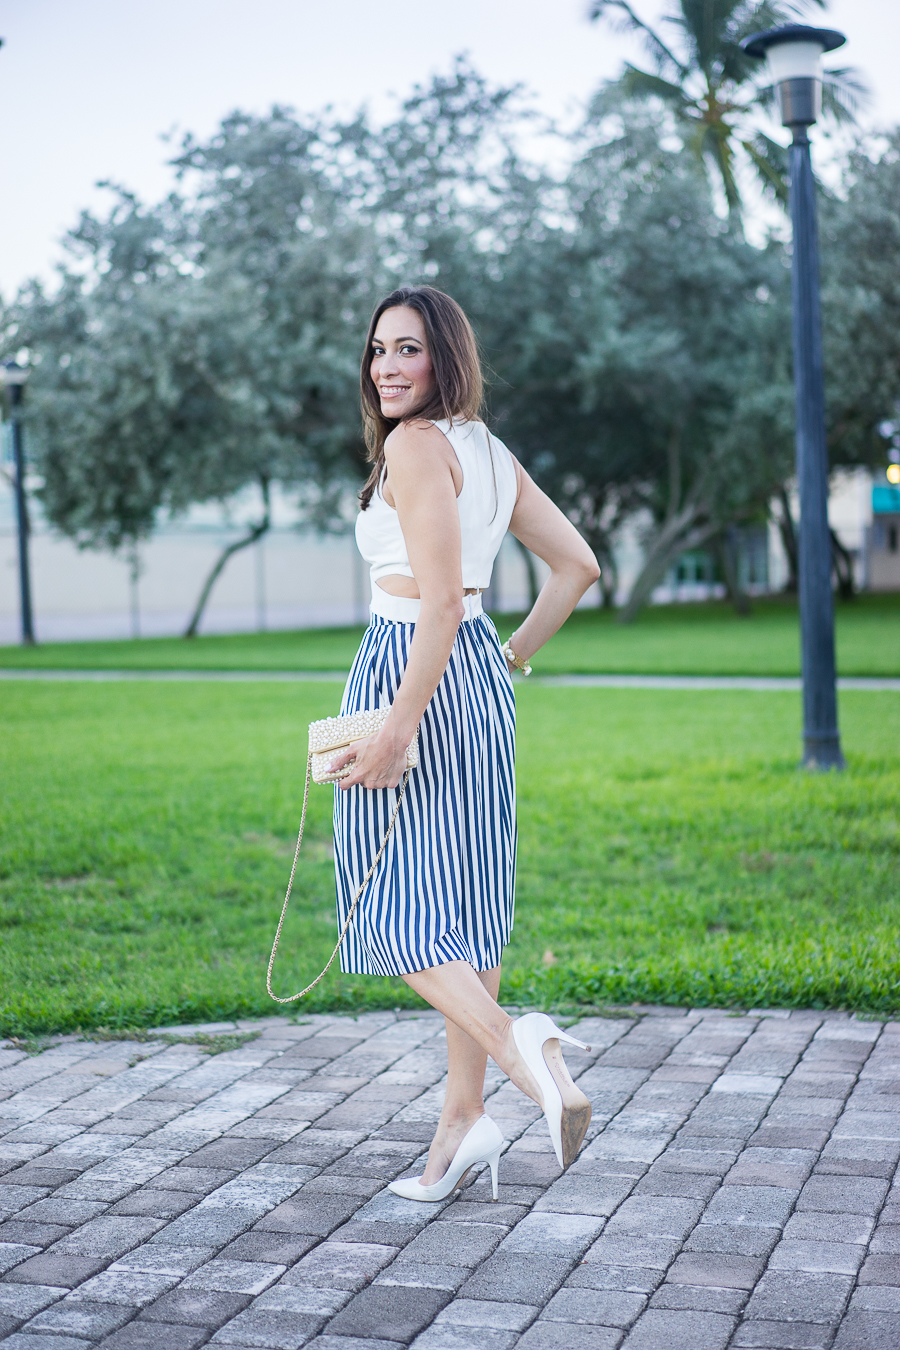 A Glam Lifestyle fashion blogger wearing white crop top with a striped skirt and chanel pearl bag